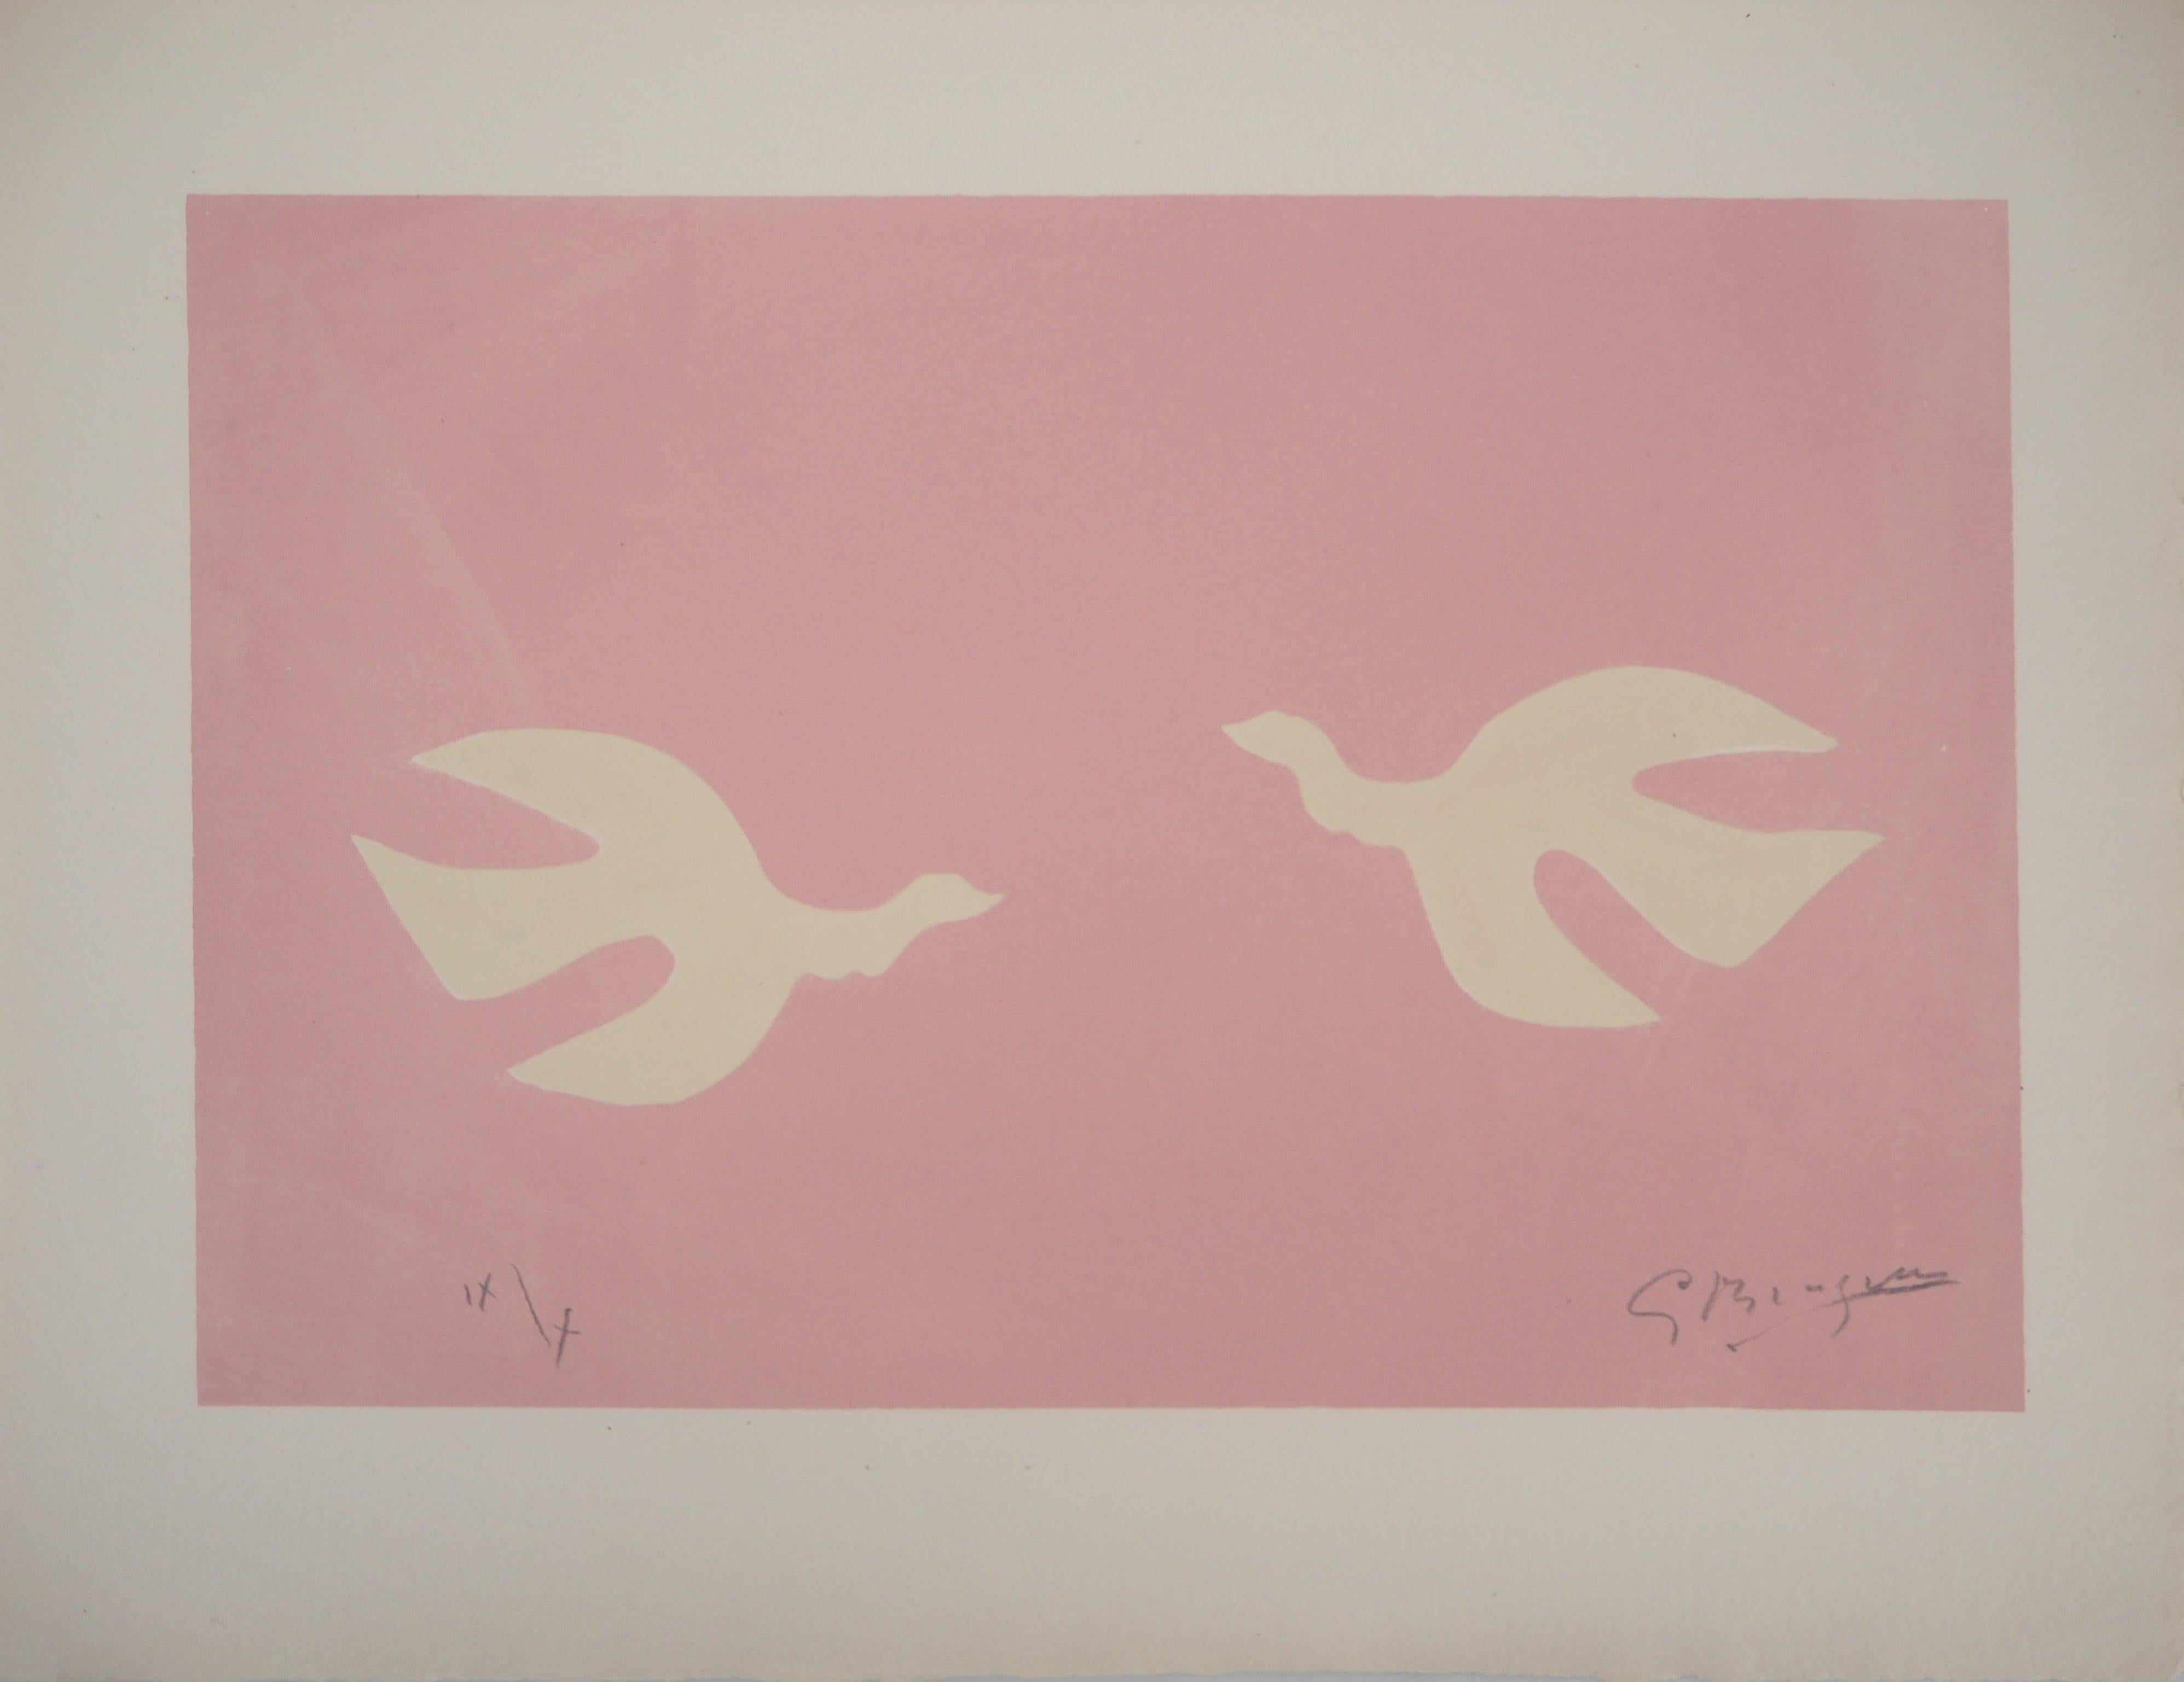 Georges Braque Animal Print - Two Flying Birds - Original lithograph, Handsigned, Ltd 10 copies (Mourlot #86)